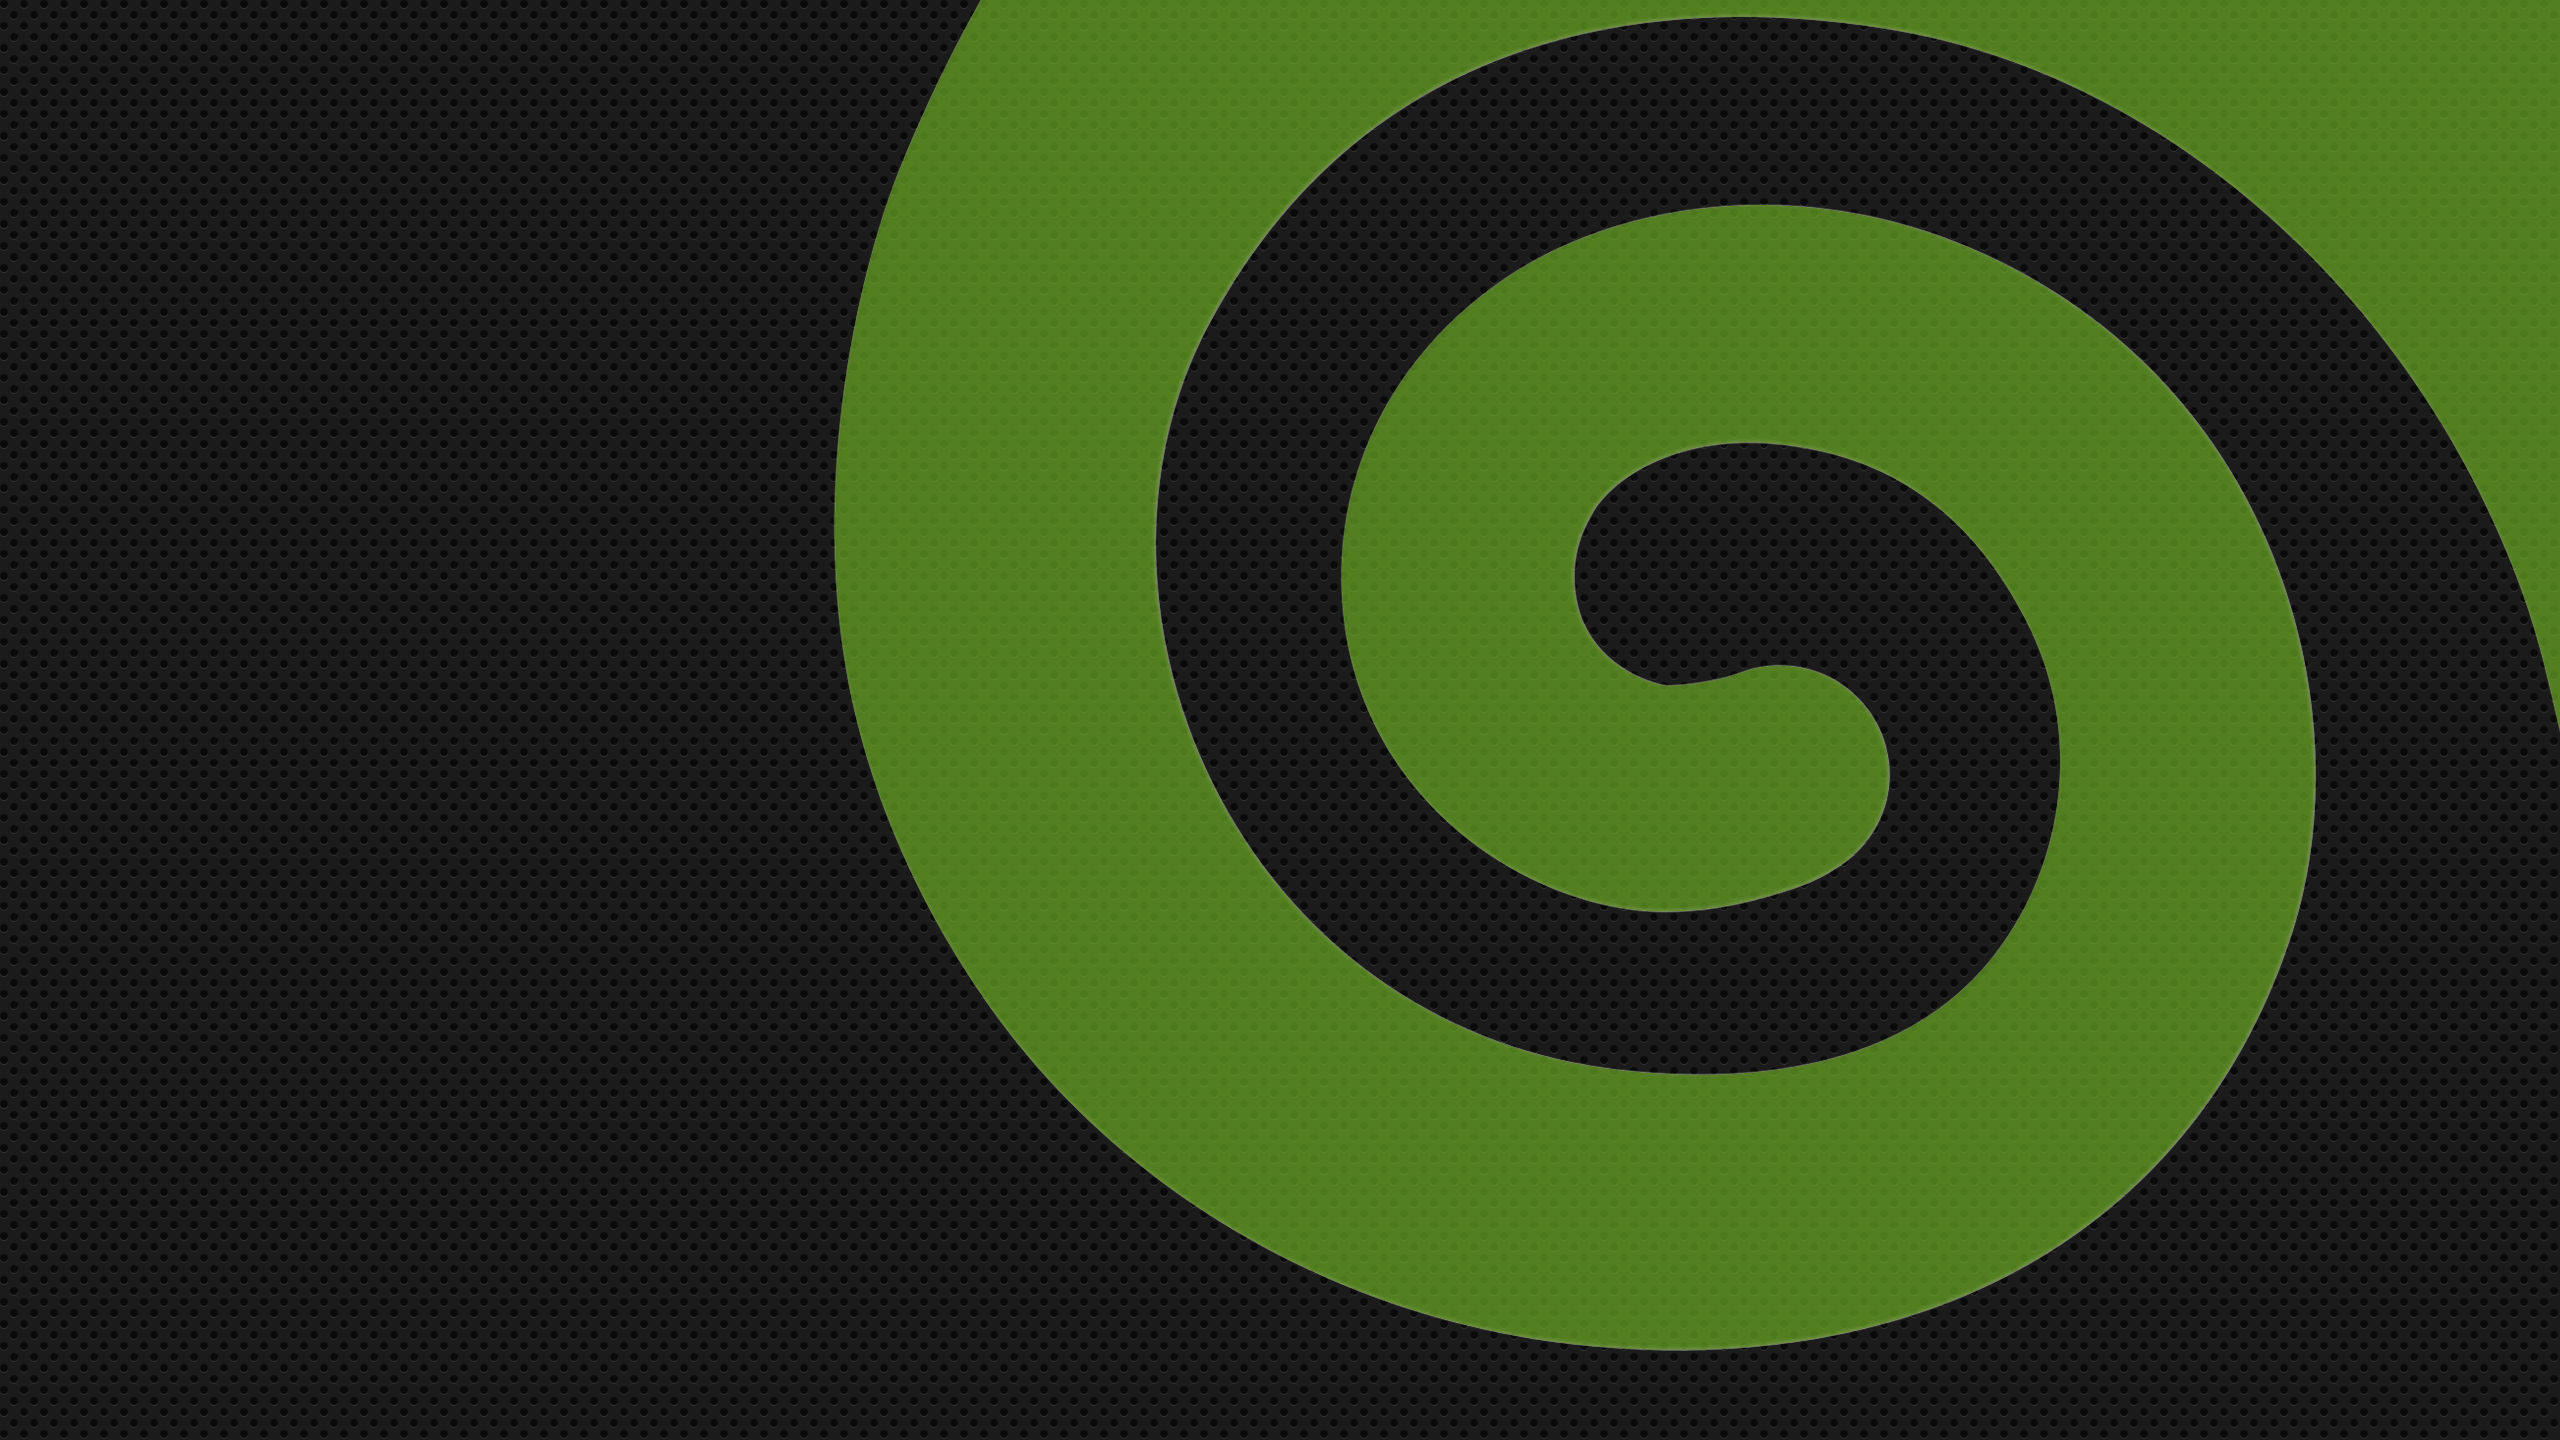 General 2560x1440 minimalism spiral Suse Linux digital art simple background green operating system